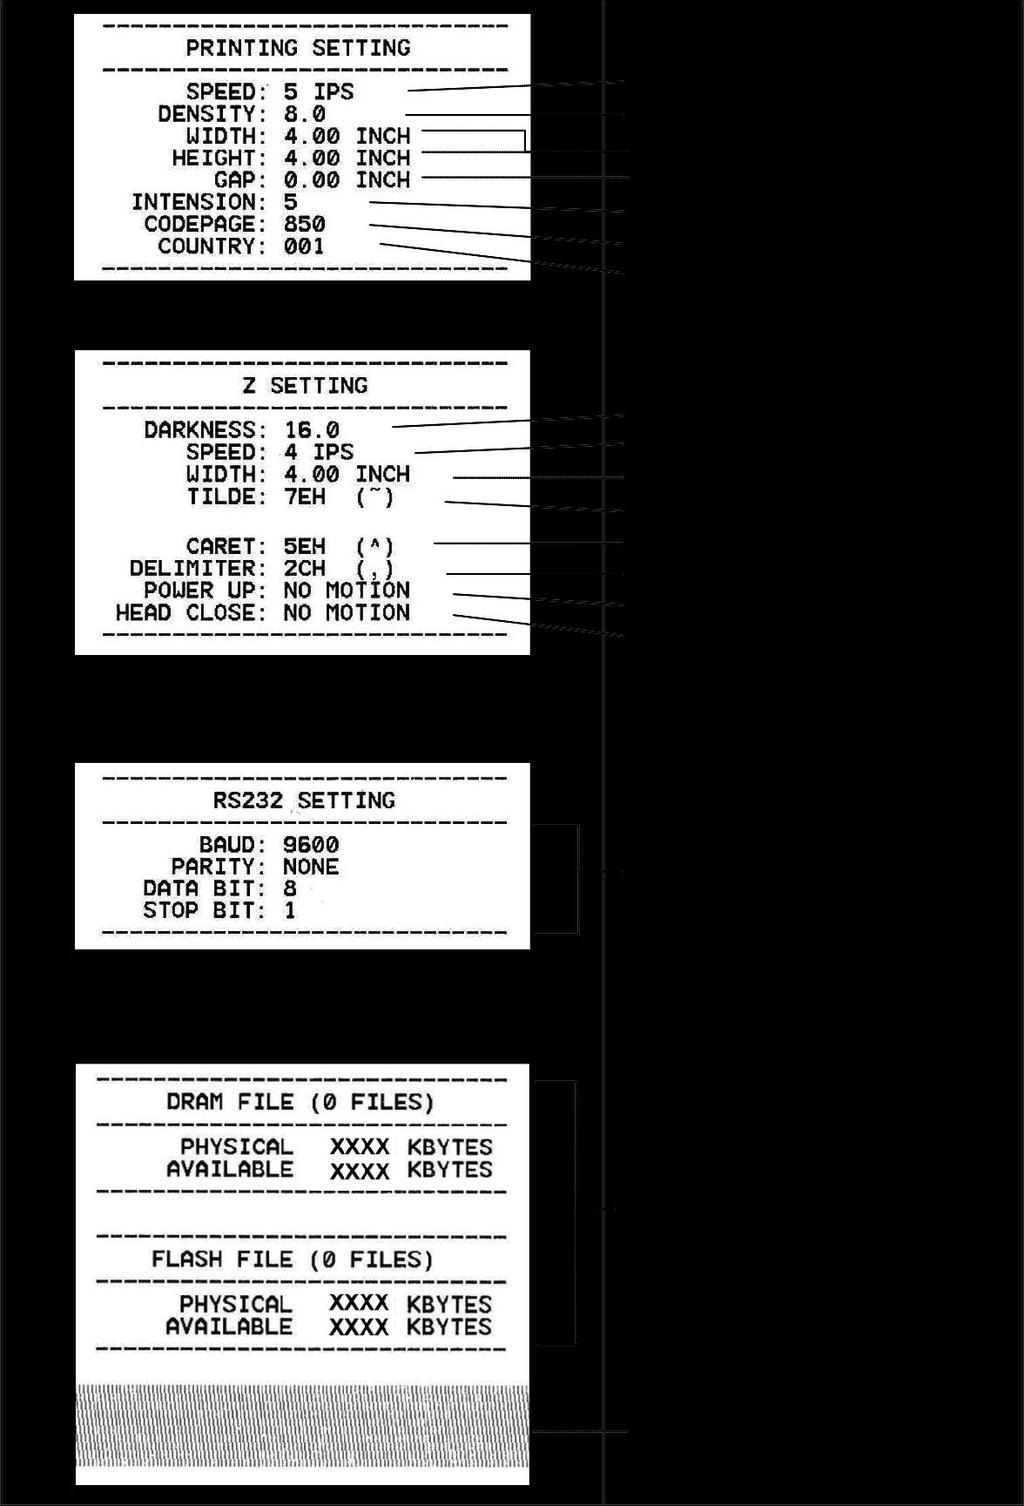 Print speed (inch/sec) Print darkness Label size (inch) Gap distance (inch) Gap/black mark sensor intension Code page Country code ZPL setting information Print darkness Print speed (inch/sec) Label